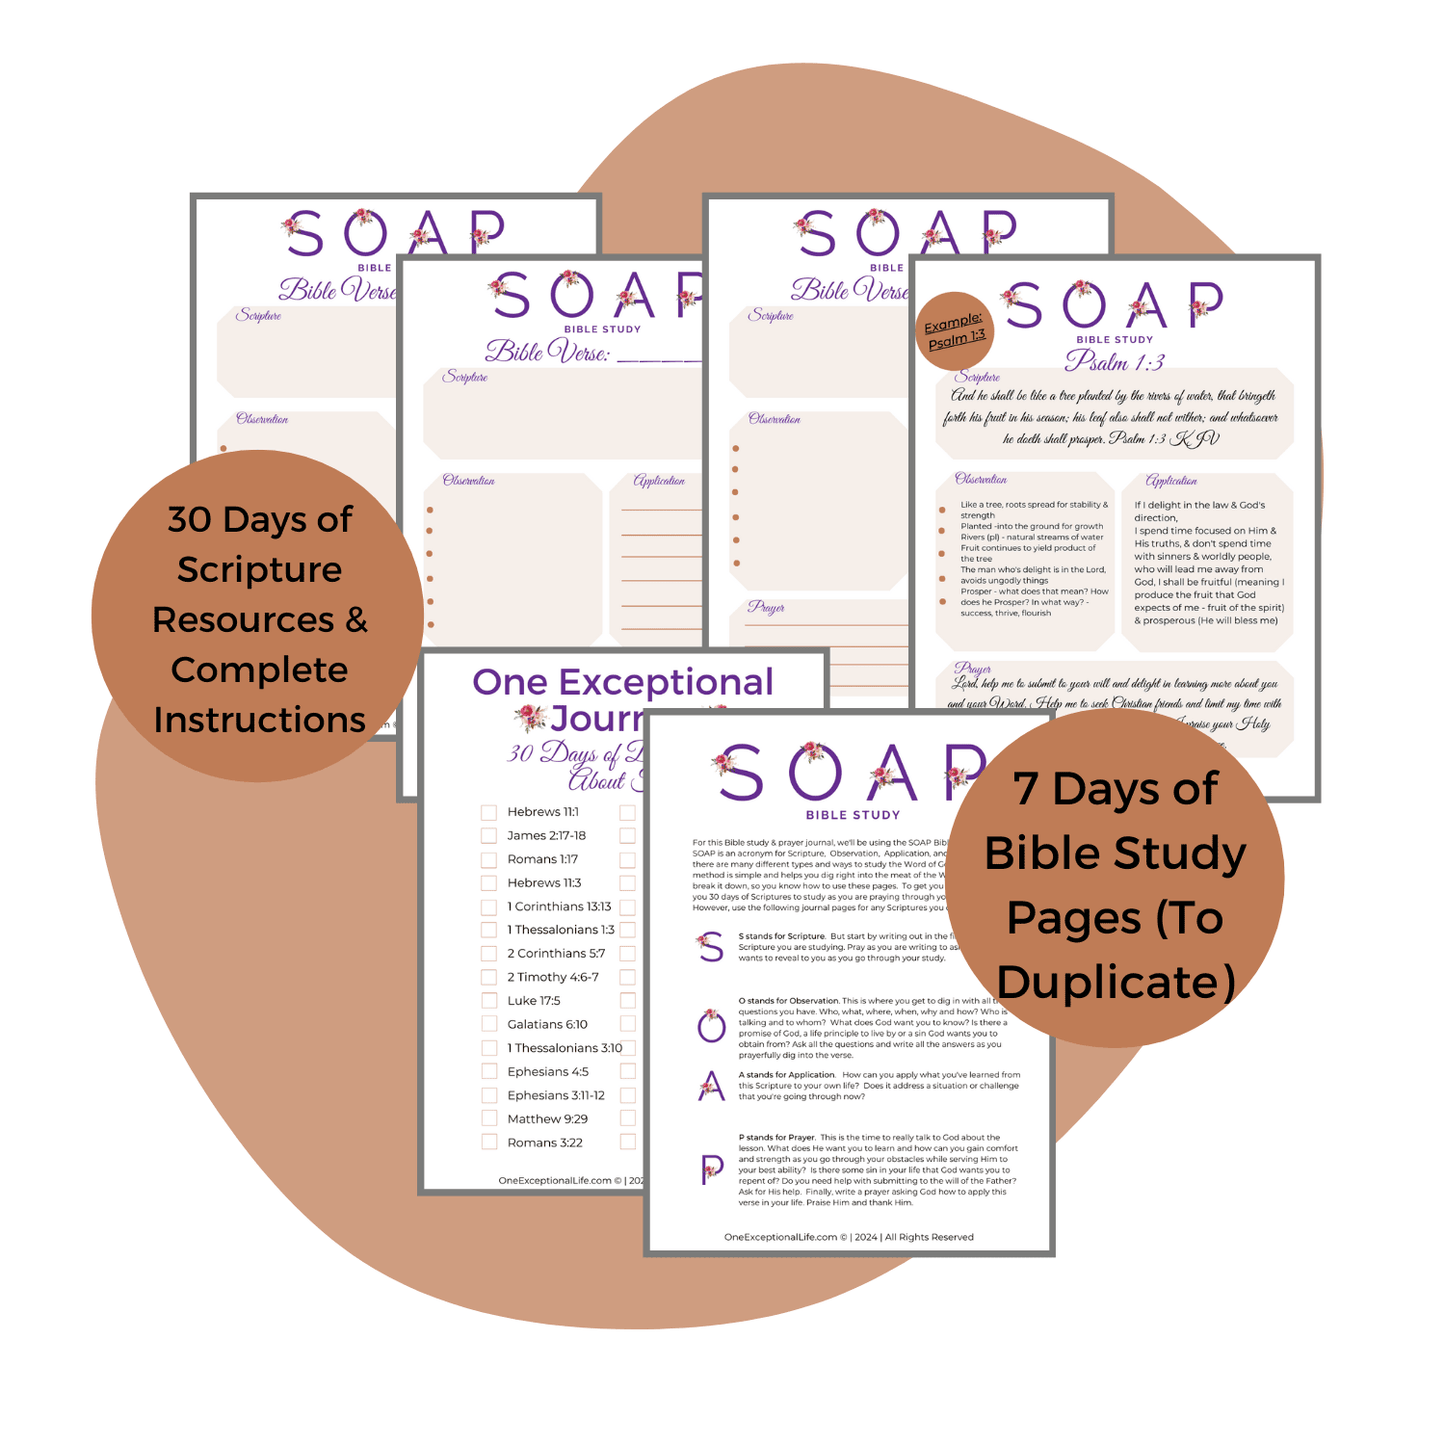 Journey of faith bible study mockup, soap study pages